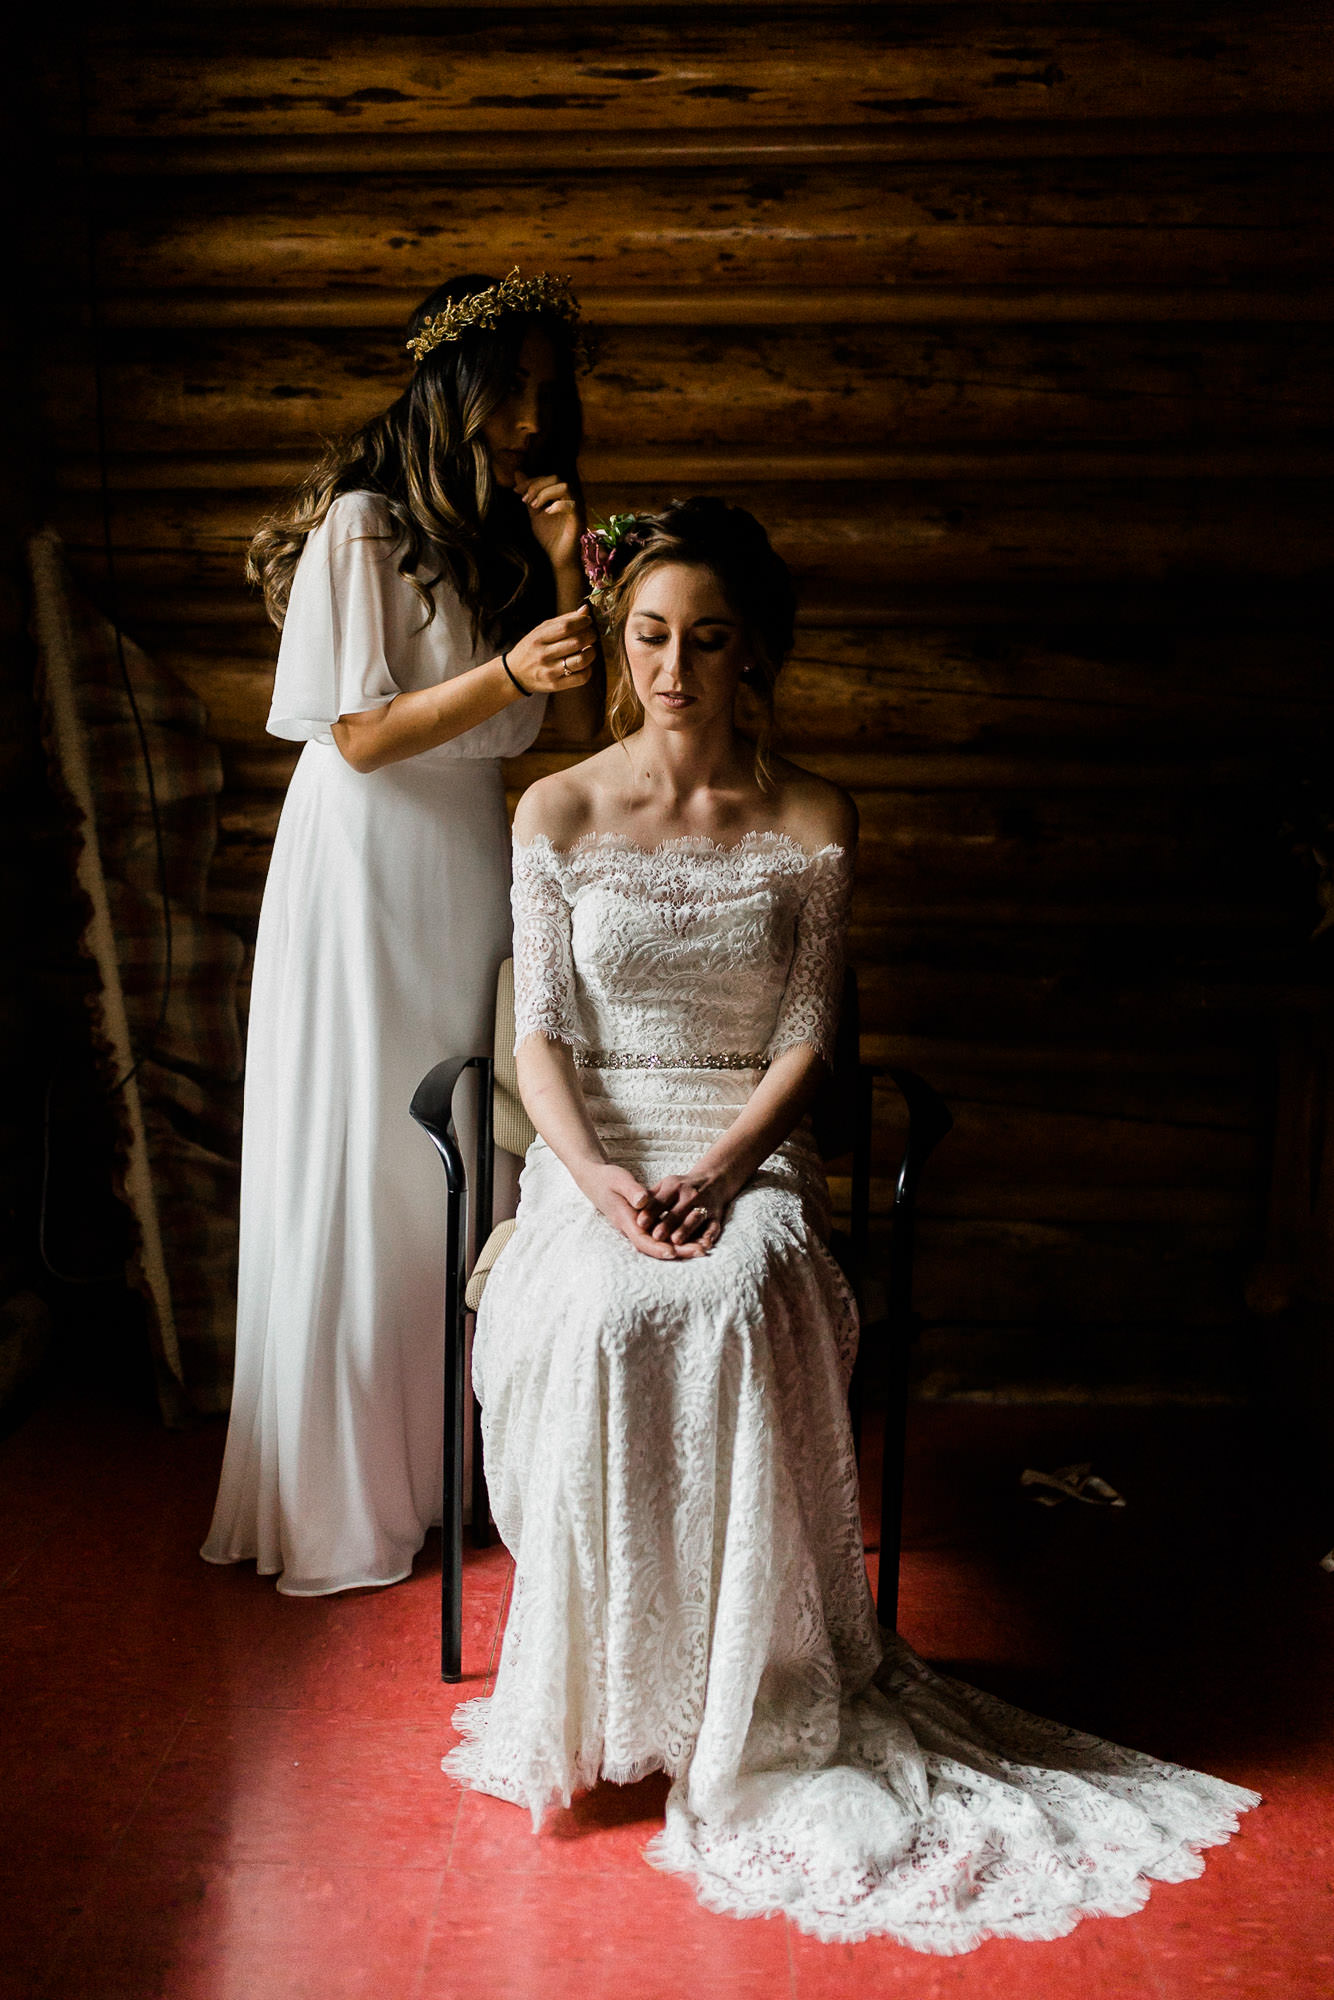 Maid of honor places floral hairpiece in bride's hair at Skyliner Lodge